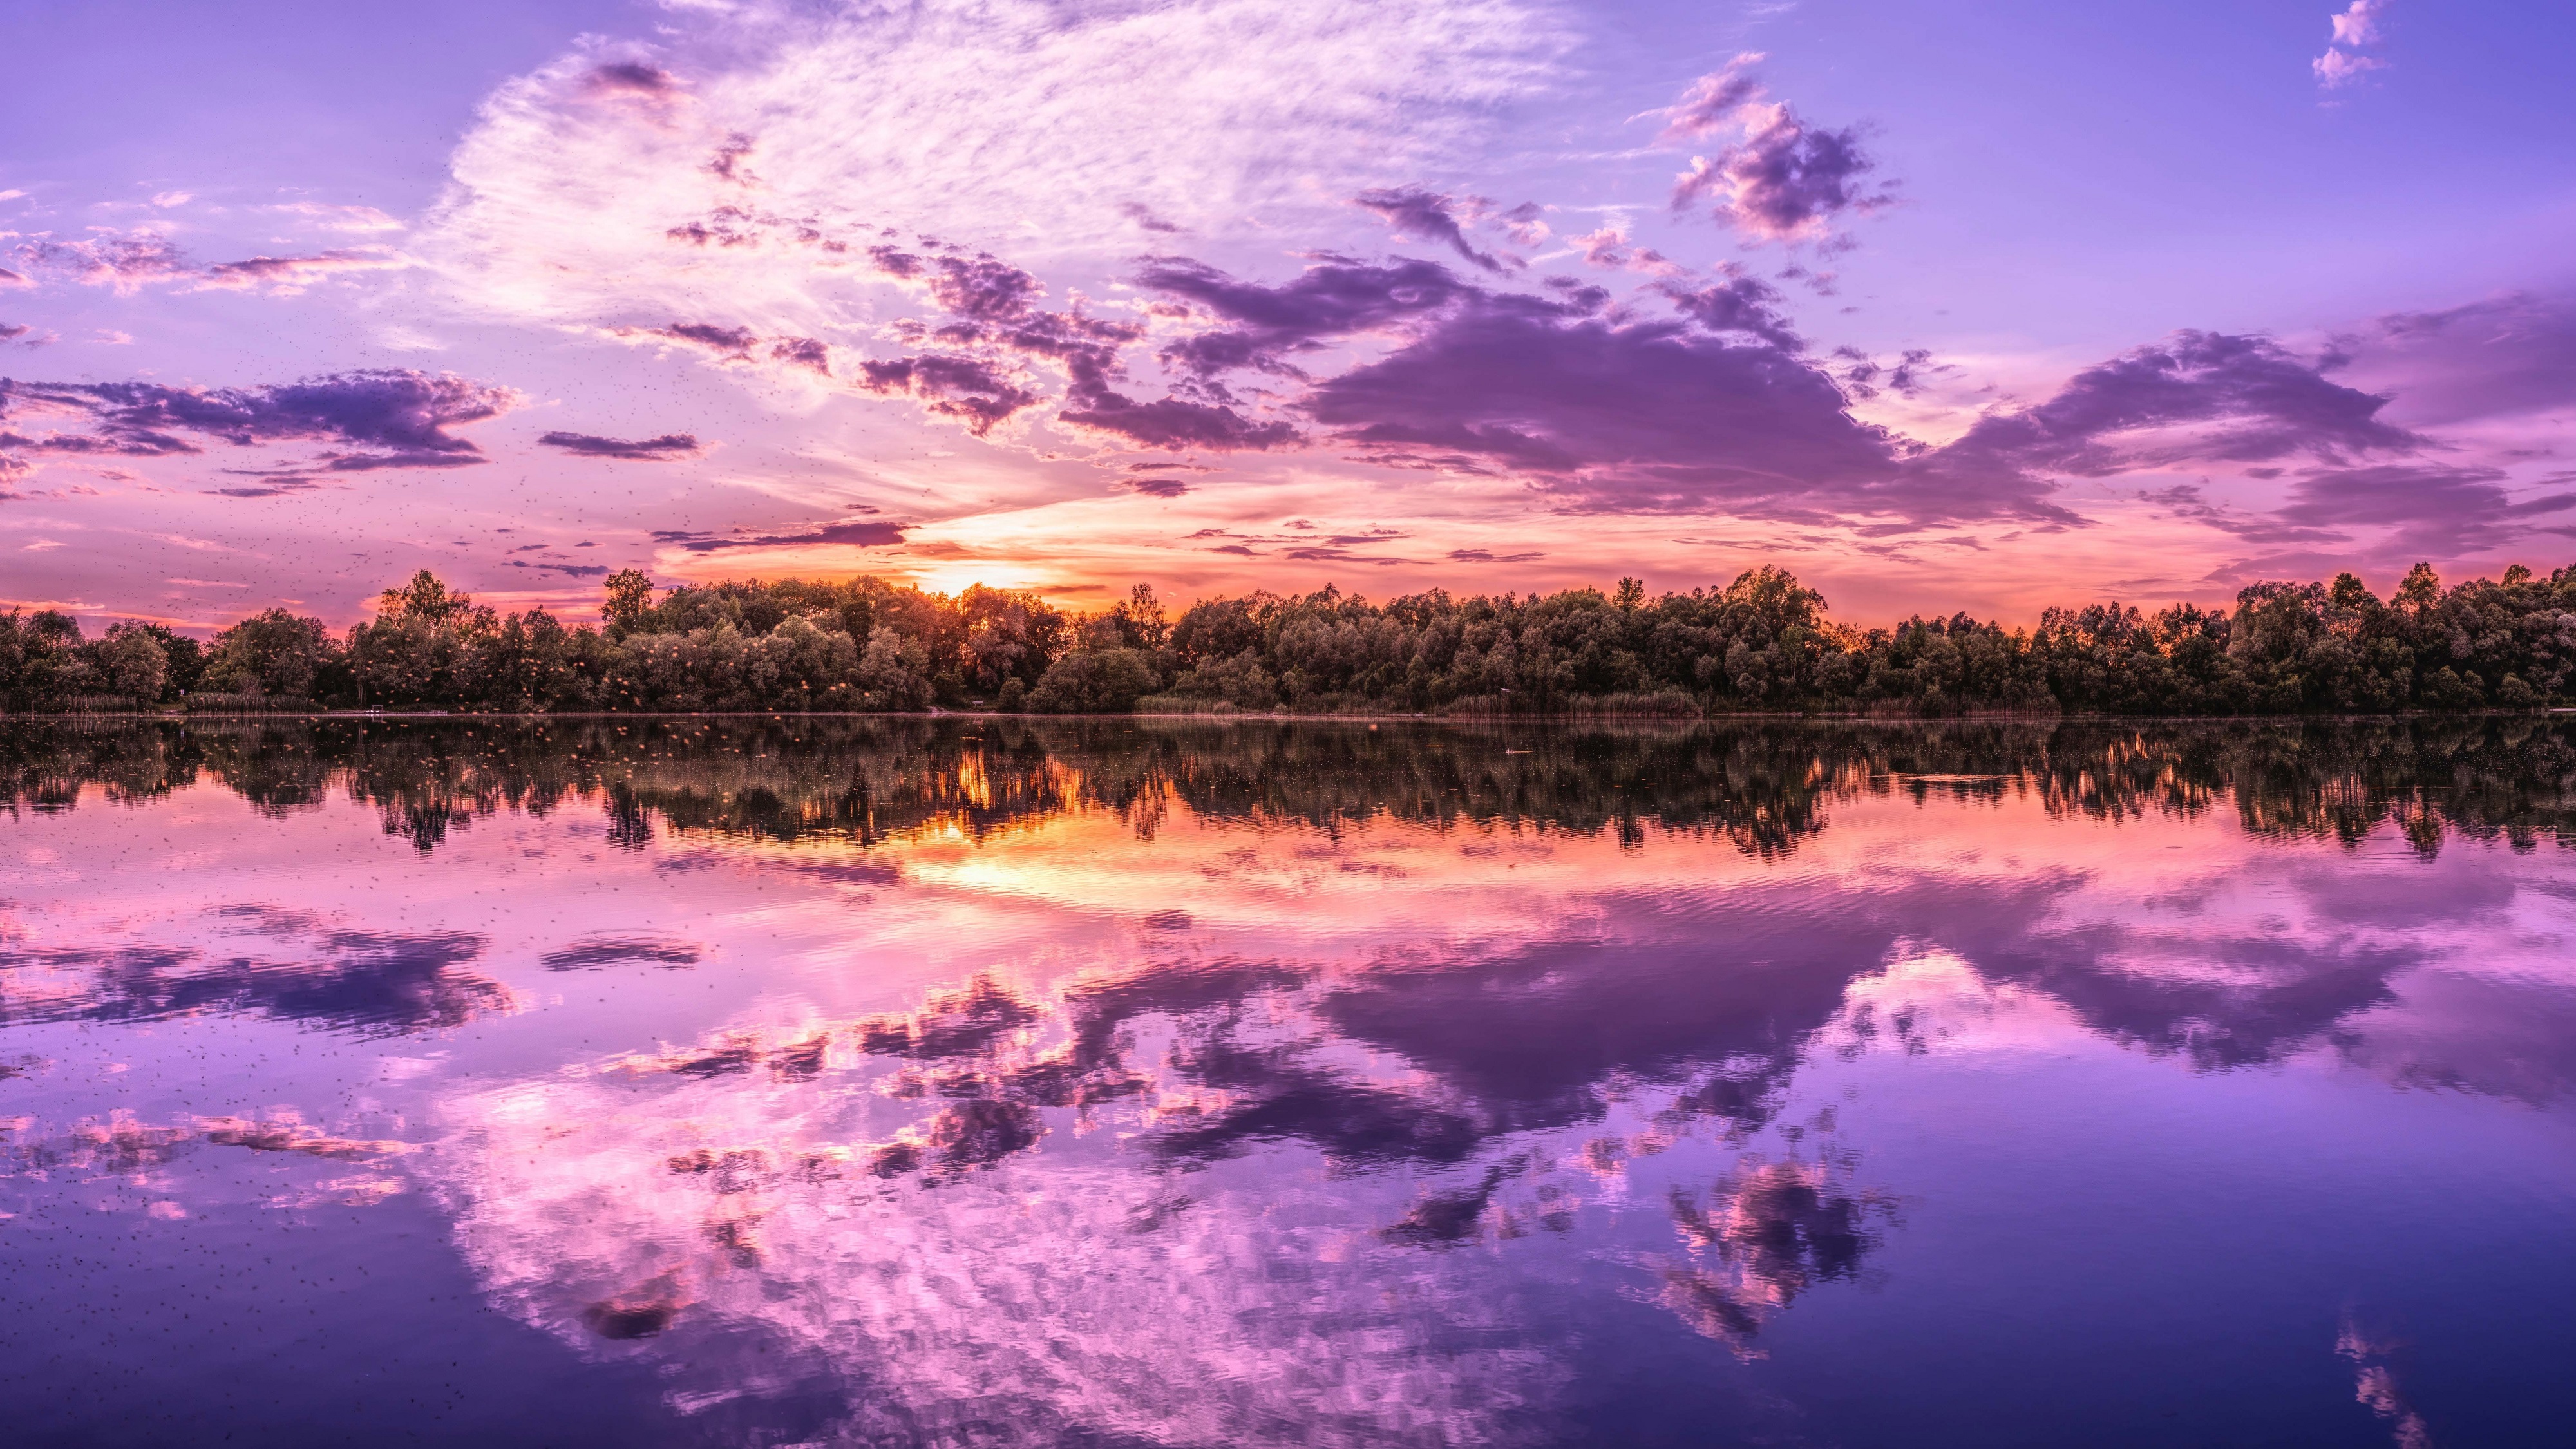 General 4000x2250 nature sunset lake reflection clouds